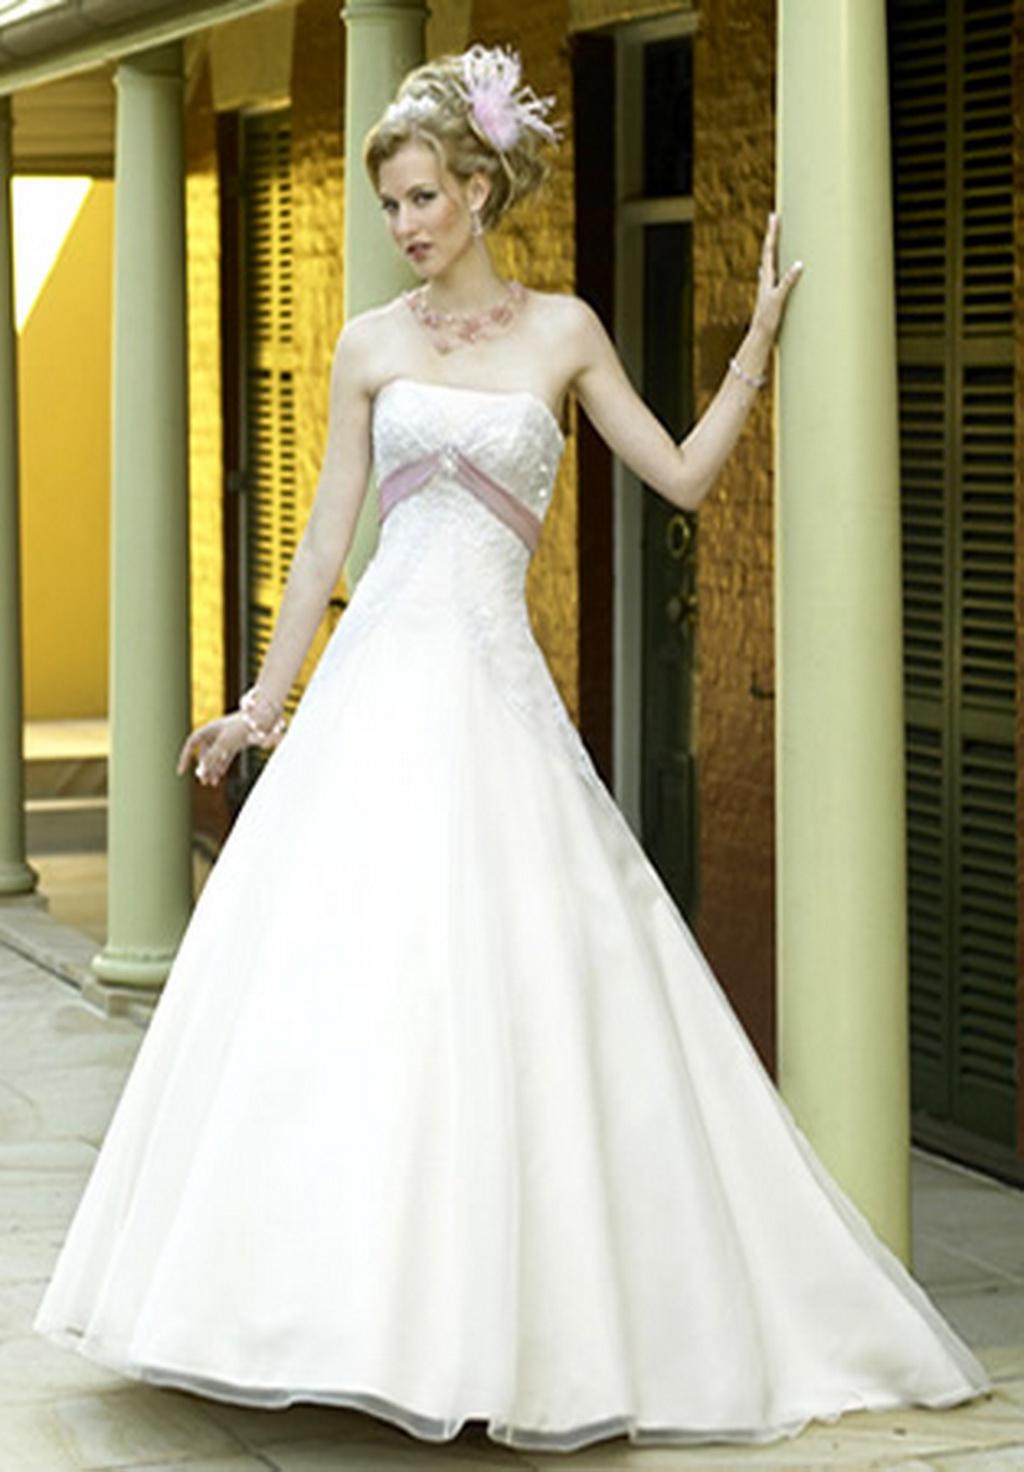 luxurious wedding gowns and elegant 5 540x776 luxurious wedding gowns and